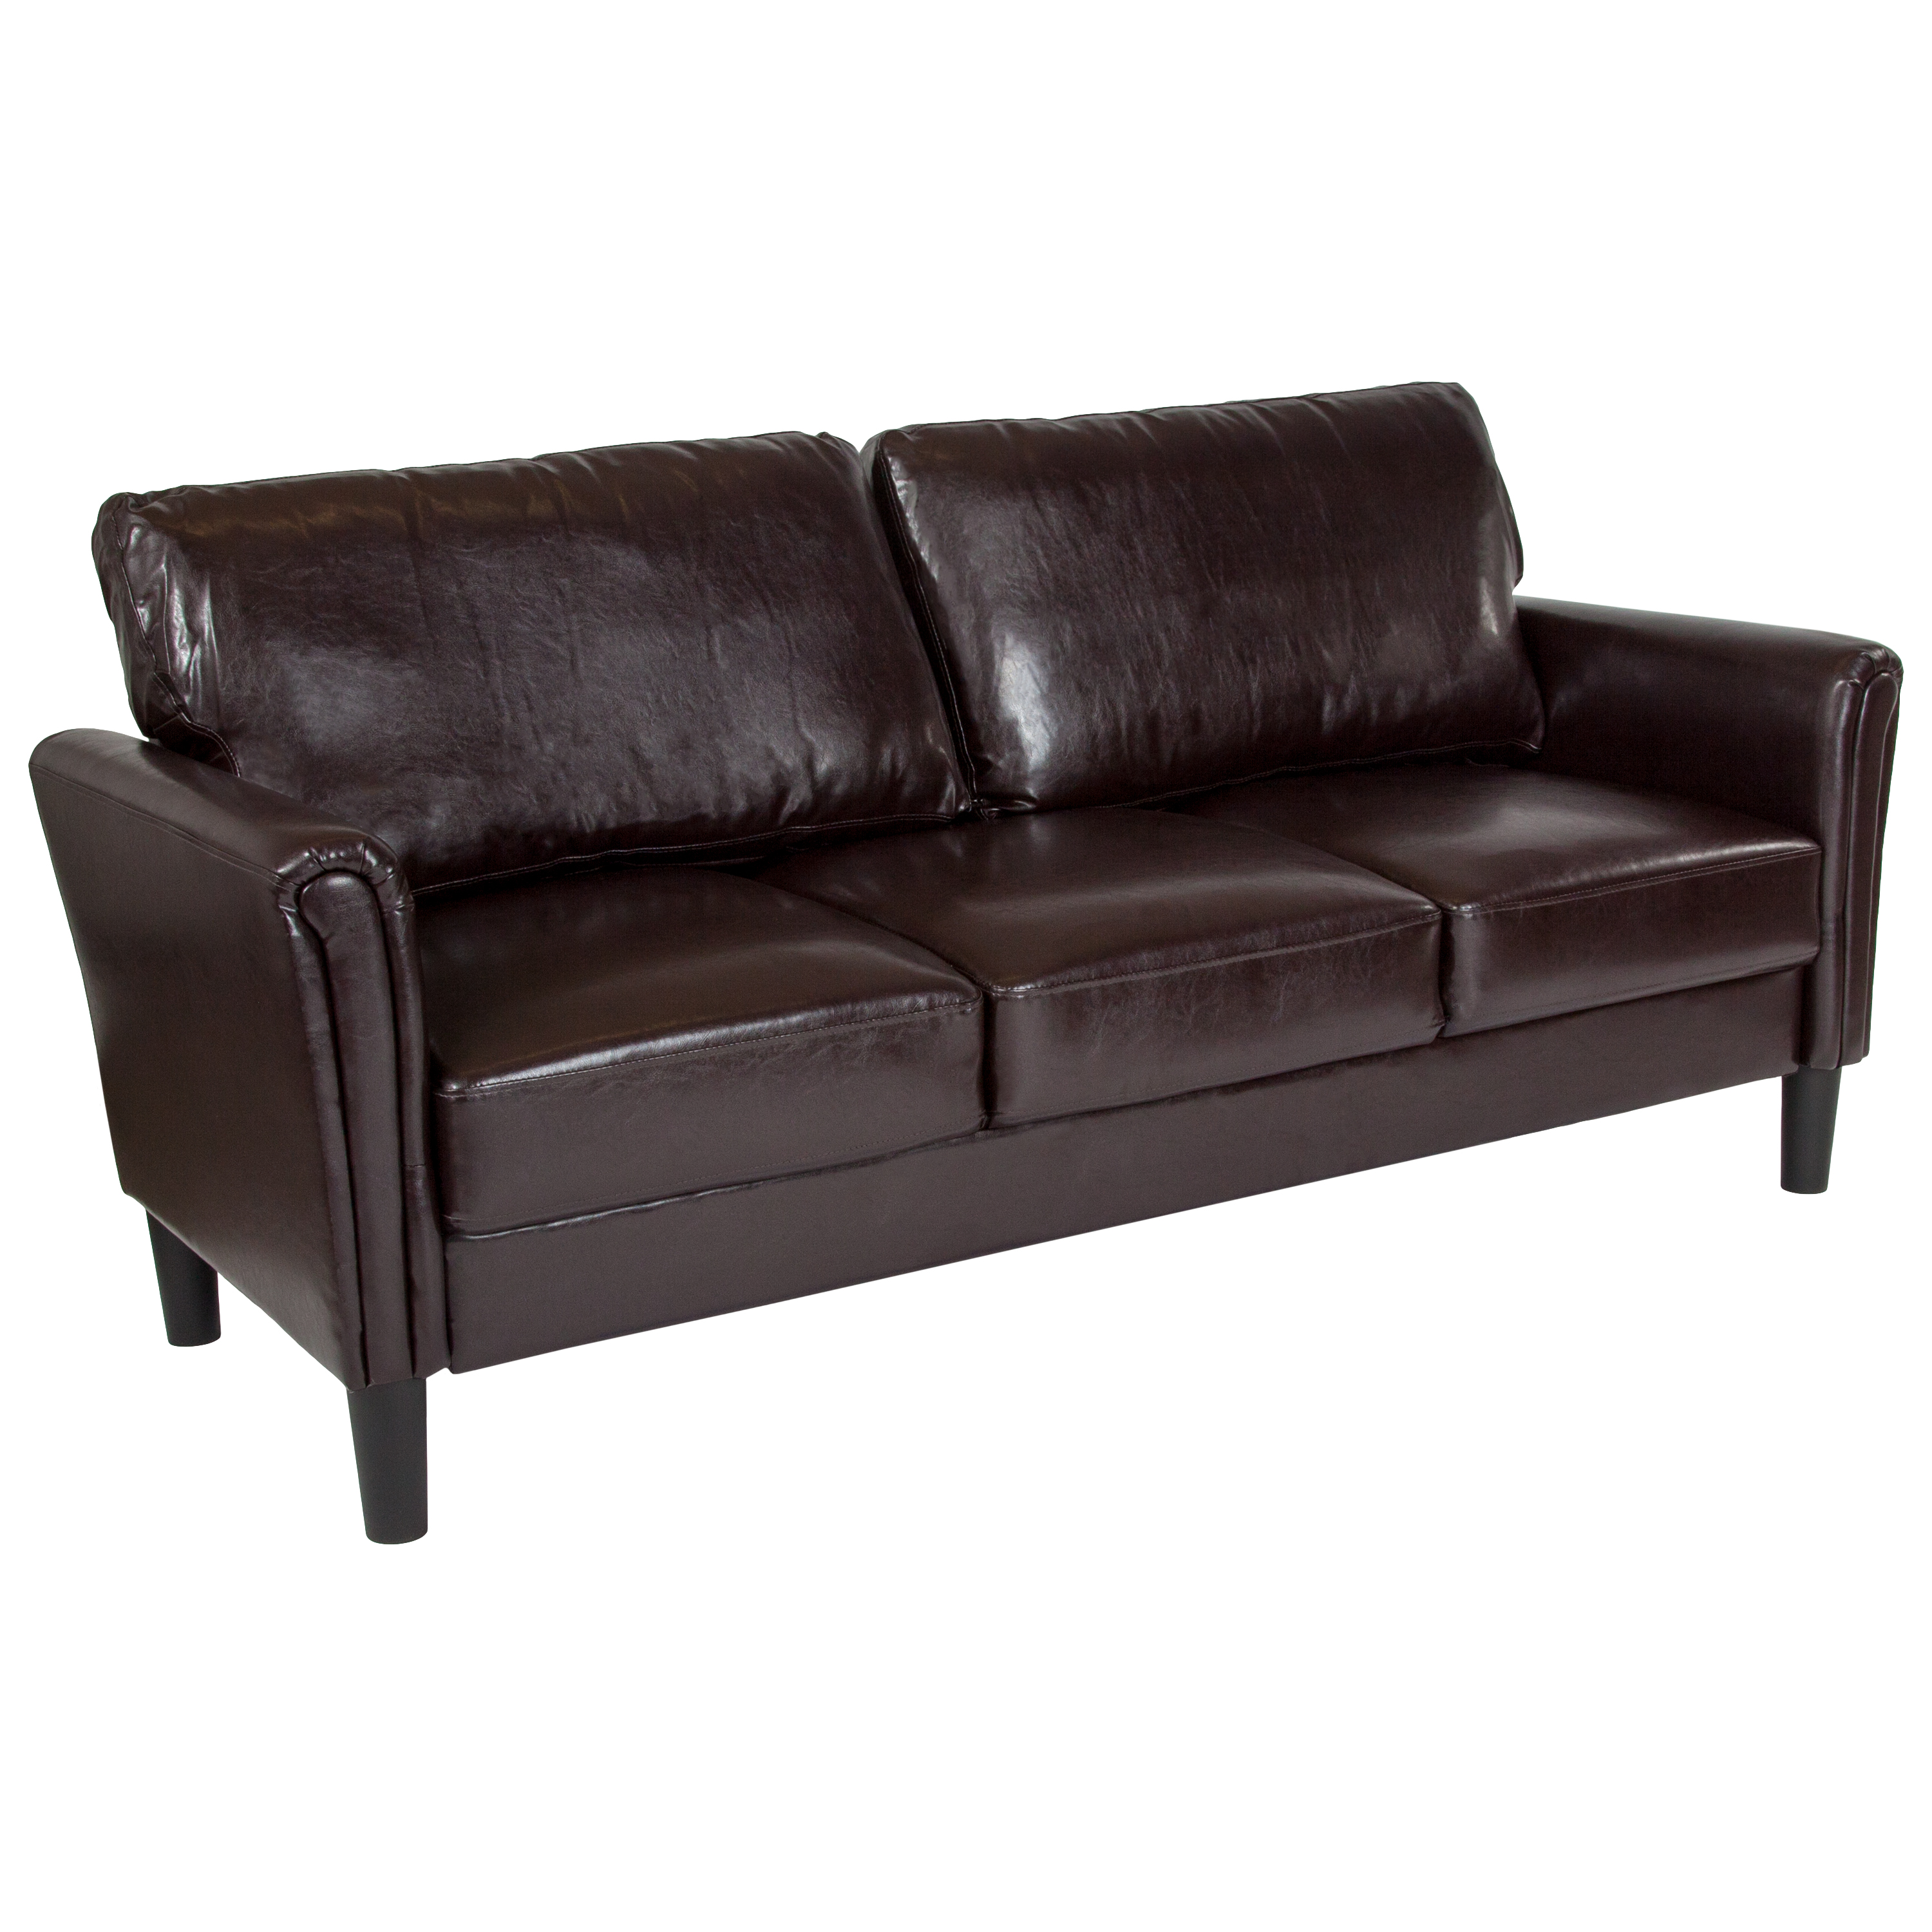 Flash Furniture Upholstered Living Room Sofa with Tailored Arms in Brown LeatherSoft - image 1 of 5